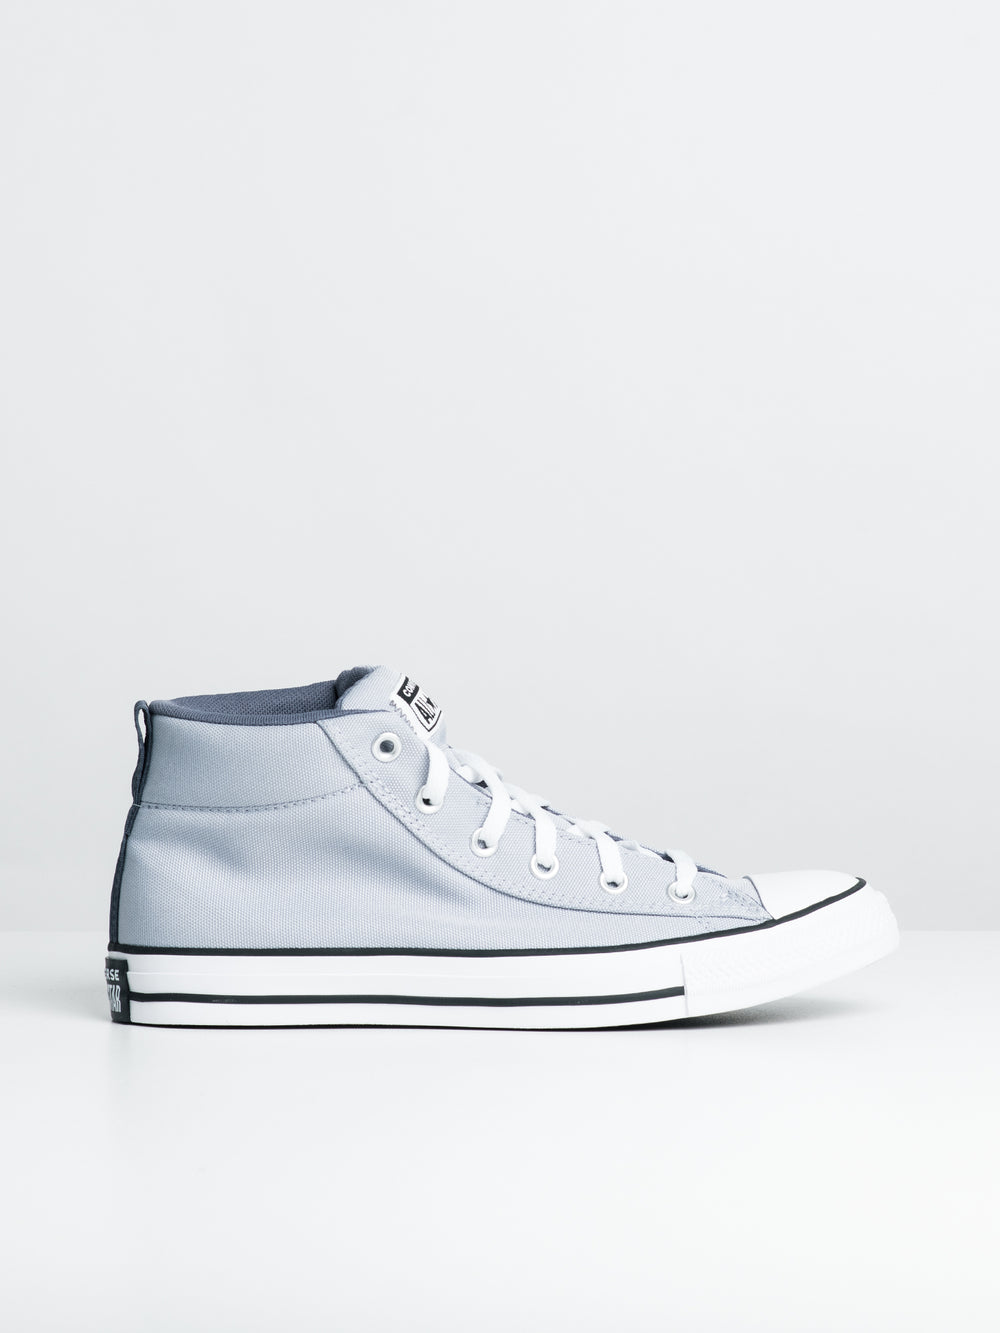 CONVERSE CHUCK TAYLOR ALL STAR STREET MID TOP POUR HOMME - DÉSTOCKAGE